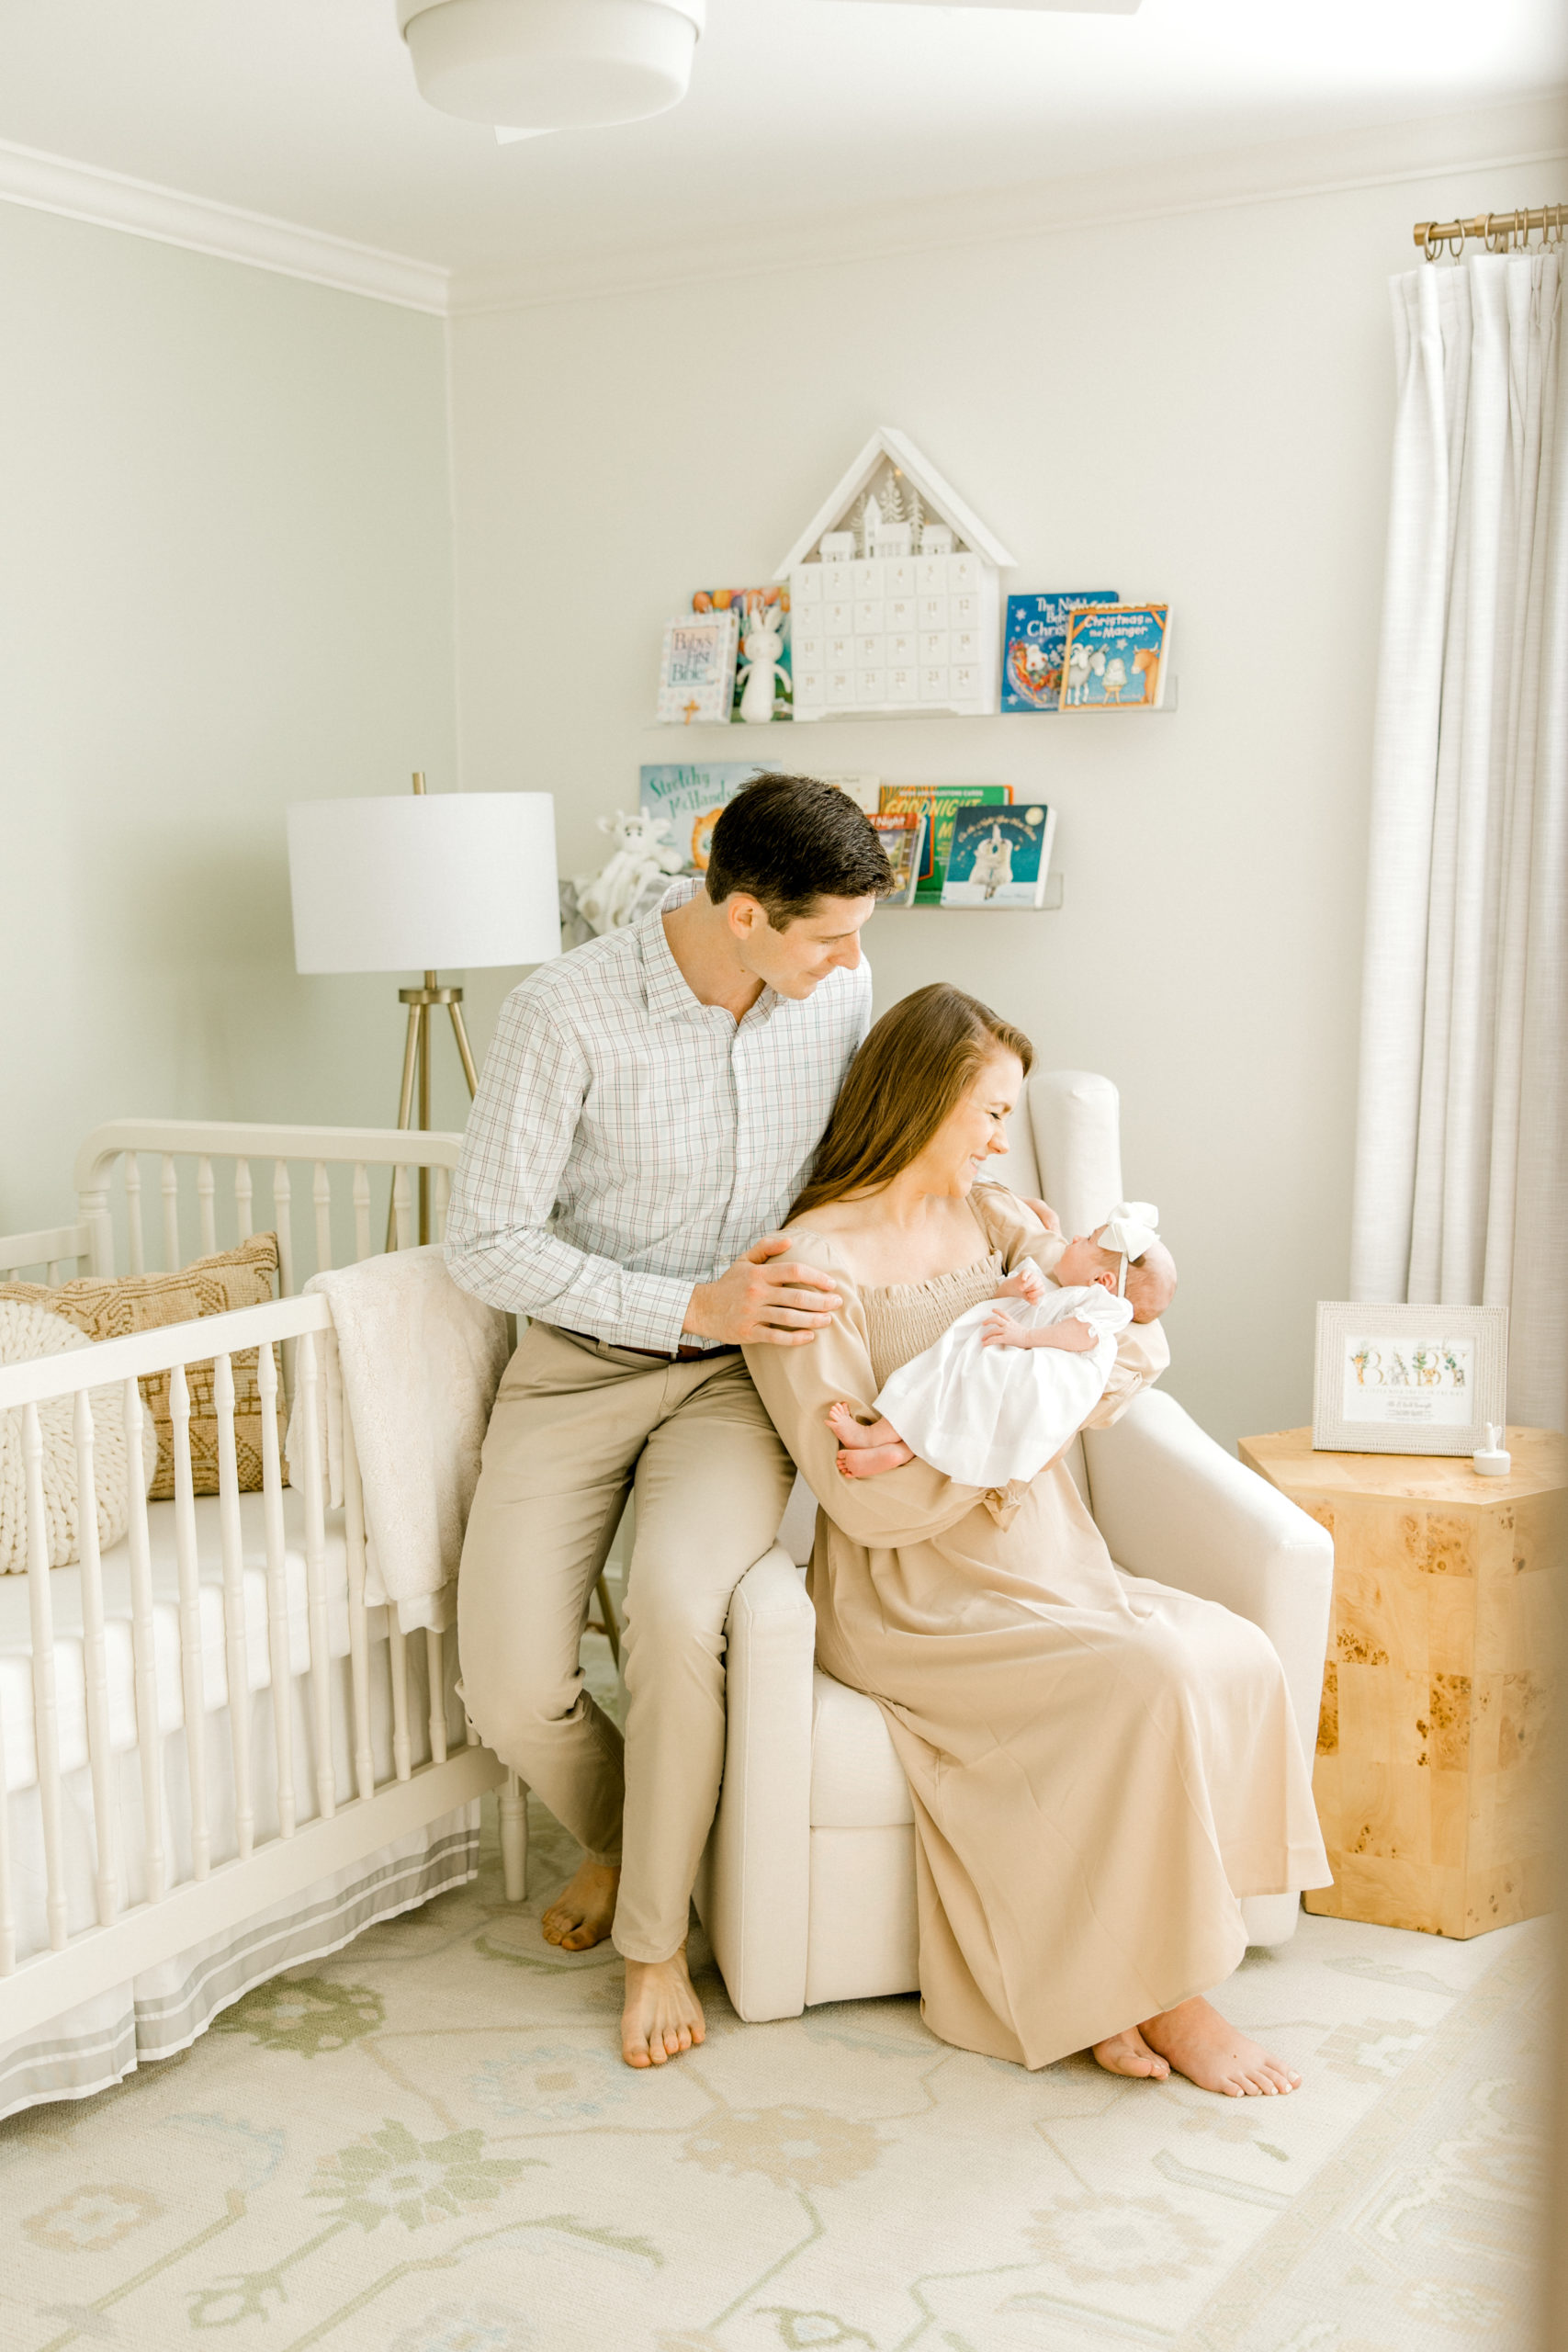 Flash for Lifestyle Newborn Sessions